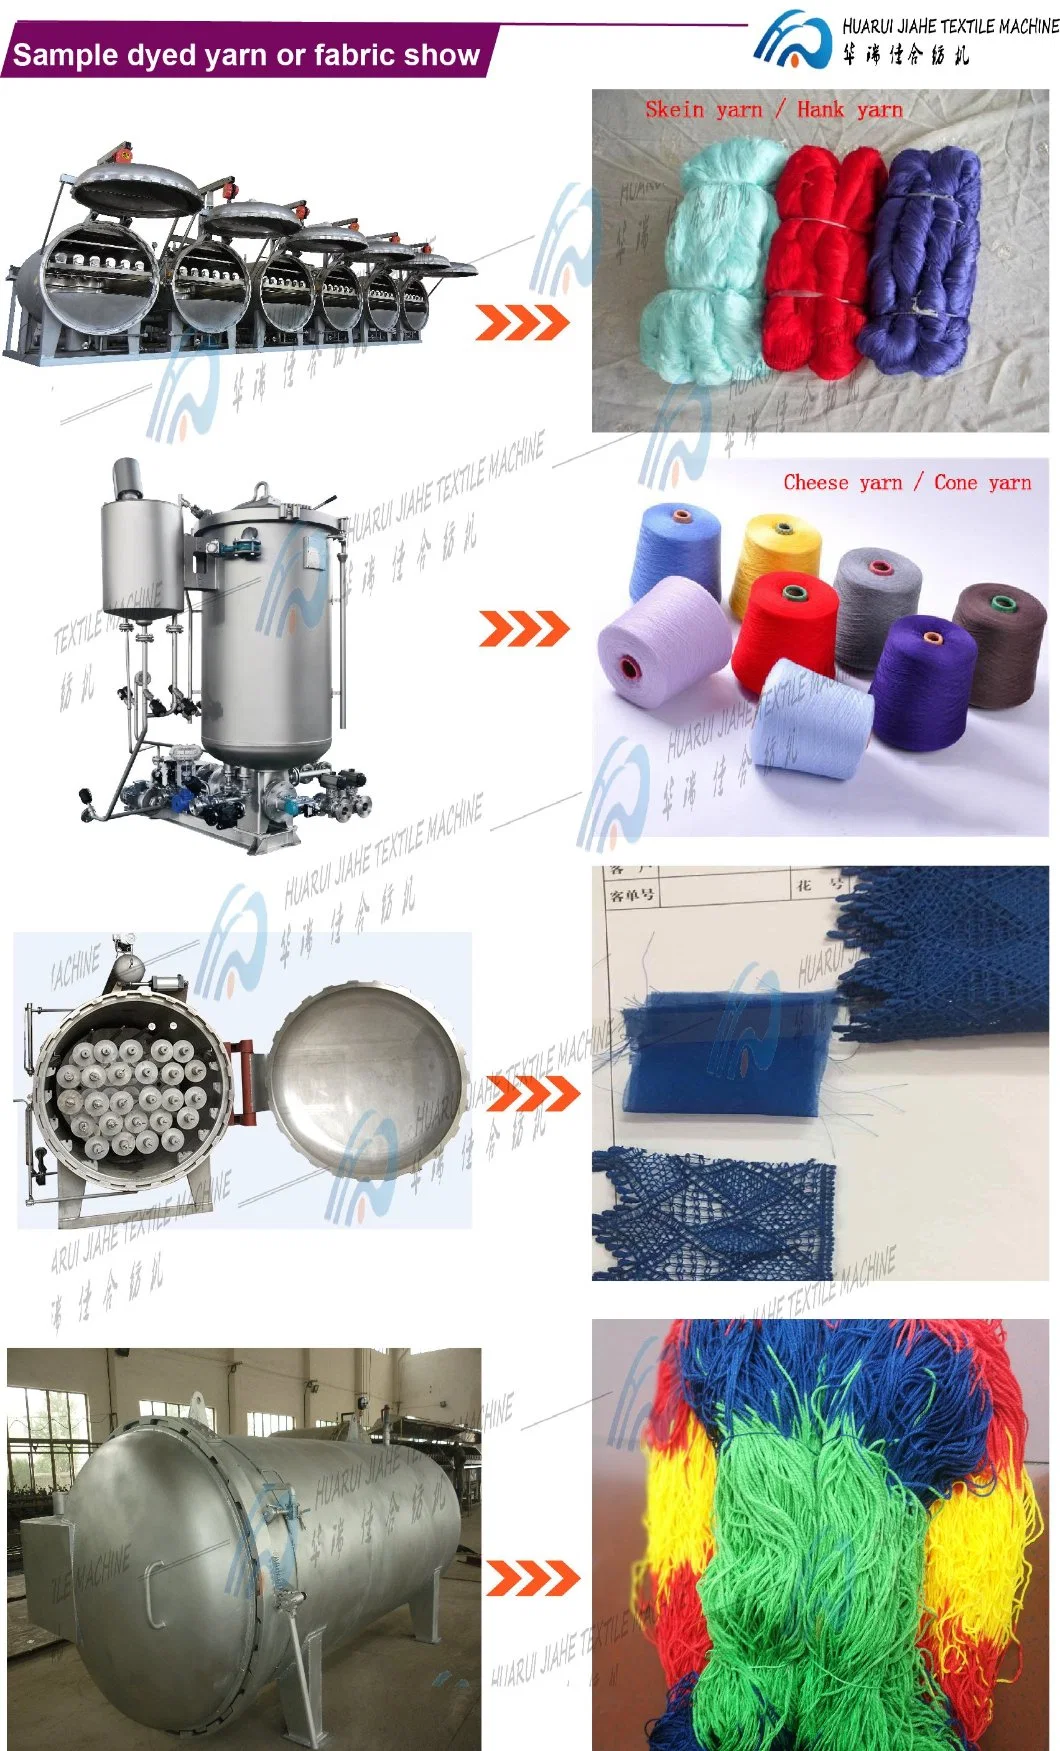 Manufacturers Supply Plastic Dyed Tube Textile Inverted Yarn Tube Accessories Dyeing Sample Machine, Cotton Wool Silk Chemical Fiber Yarn Fiber Fabric Dye Machi